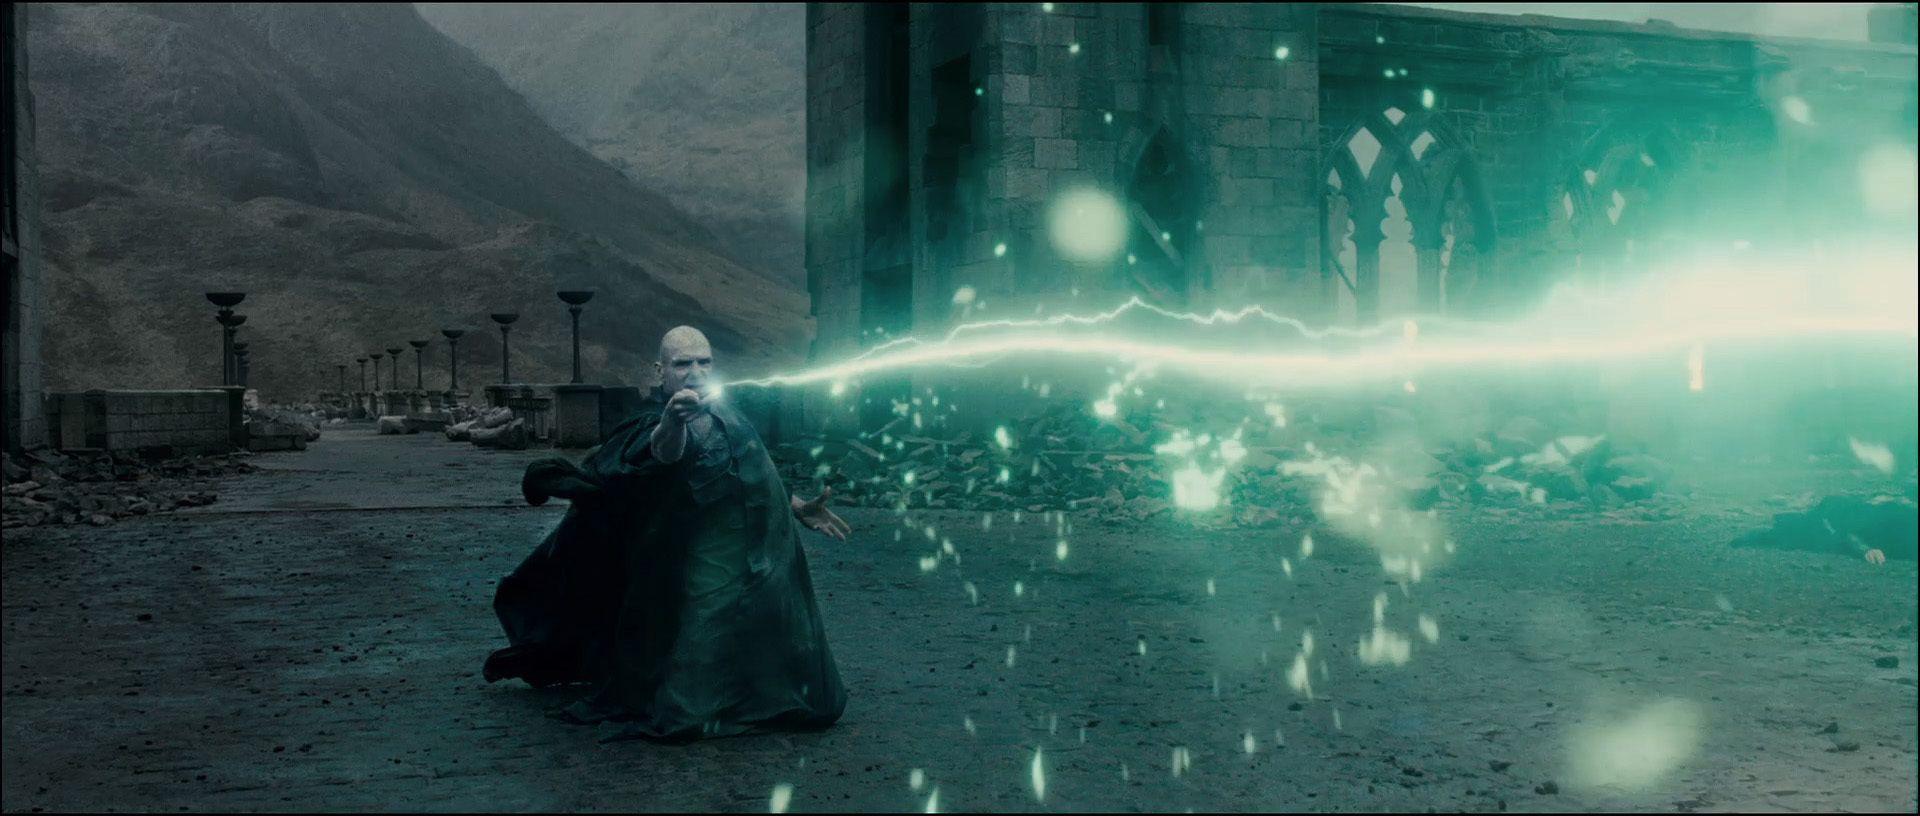 Harry Potter and Lord Voldemort image Harry Potter and the Deathly